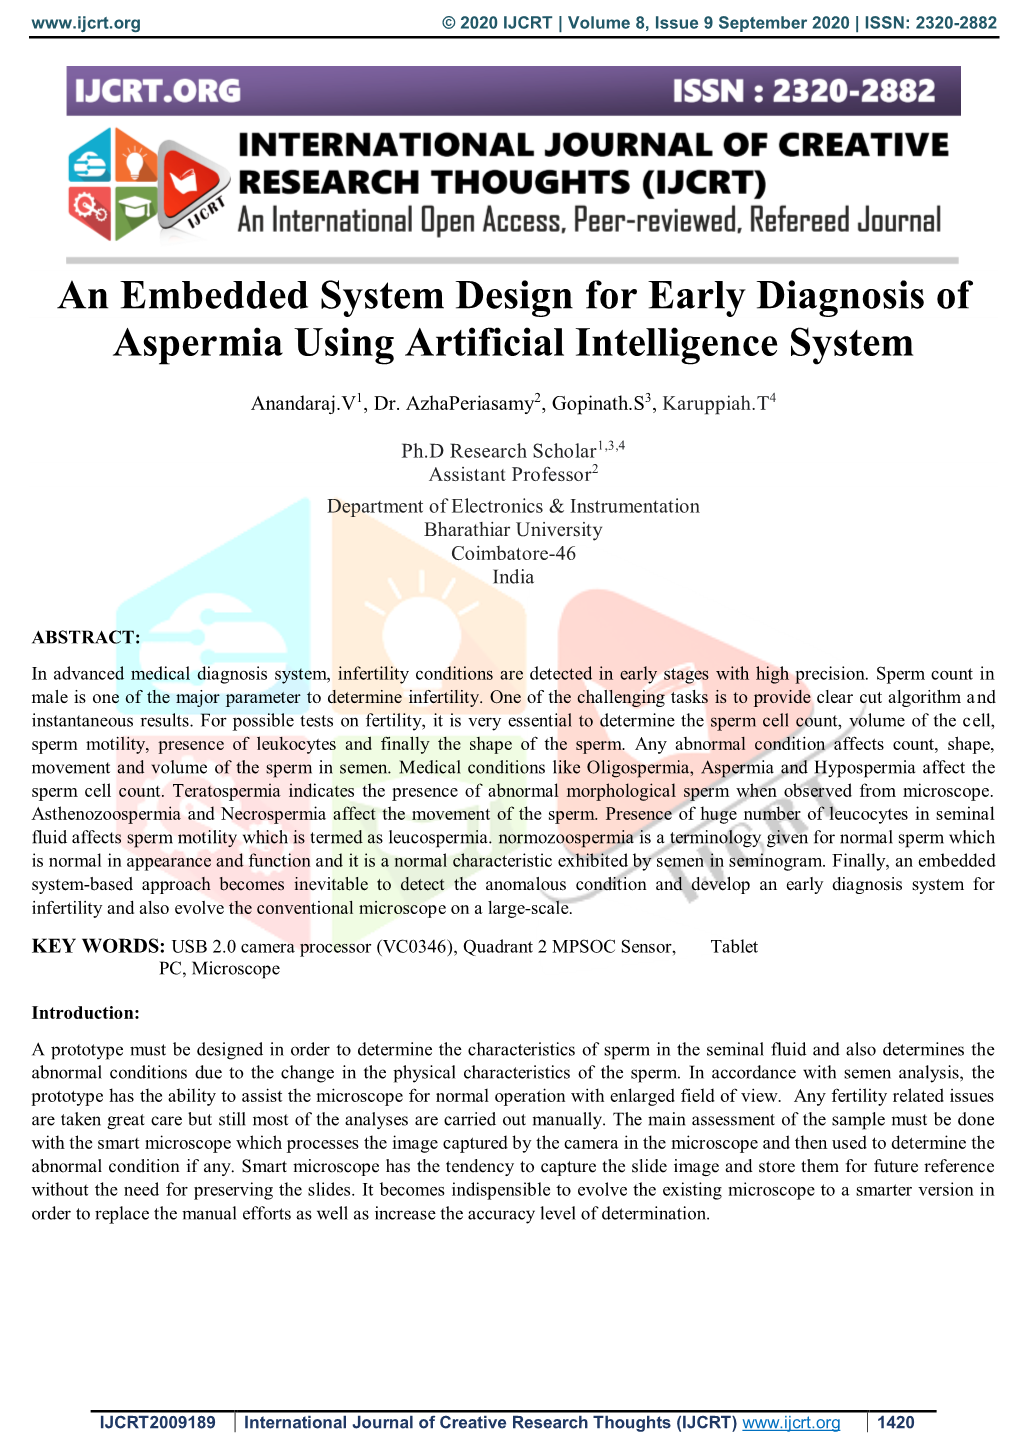 An Embedded System Design for Early Diagnosis of Aspermia Using Artificial Intelligence System